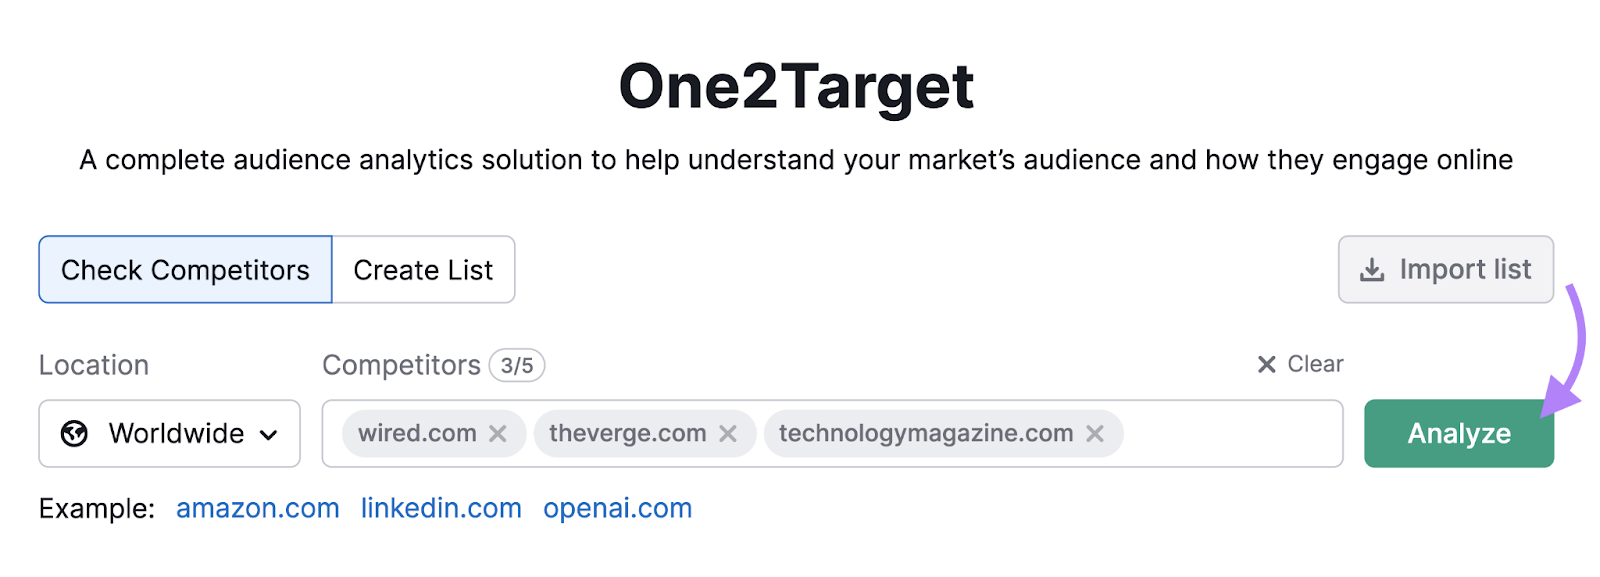 domains like wired, the verge, and technology magazine entered into one2target tool